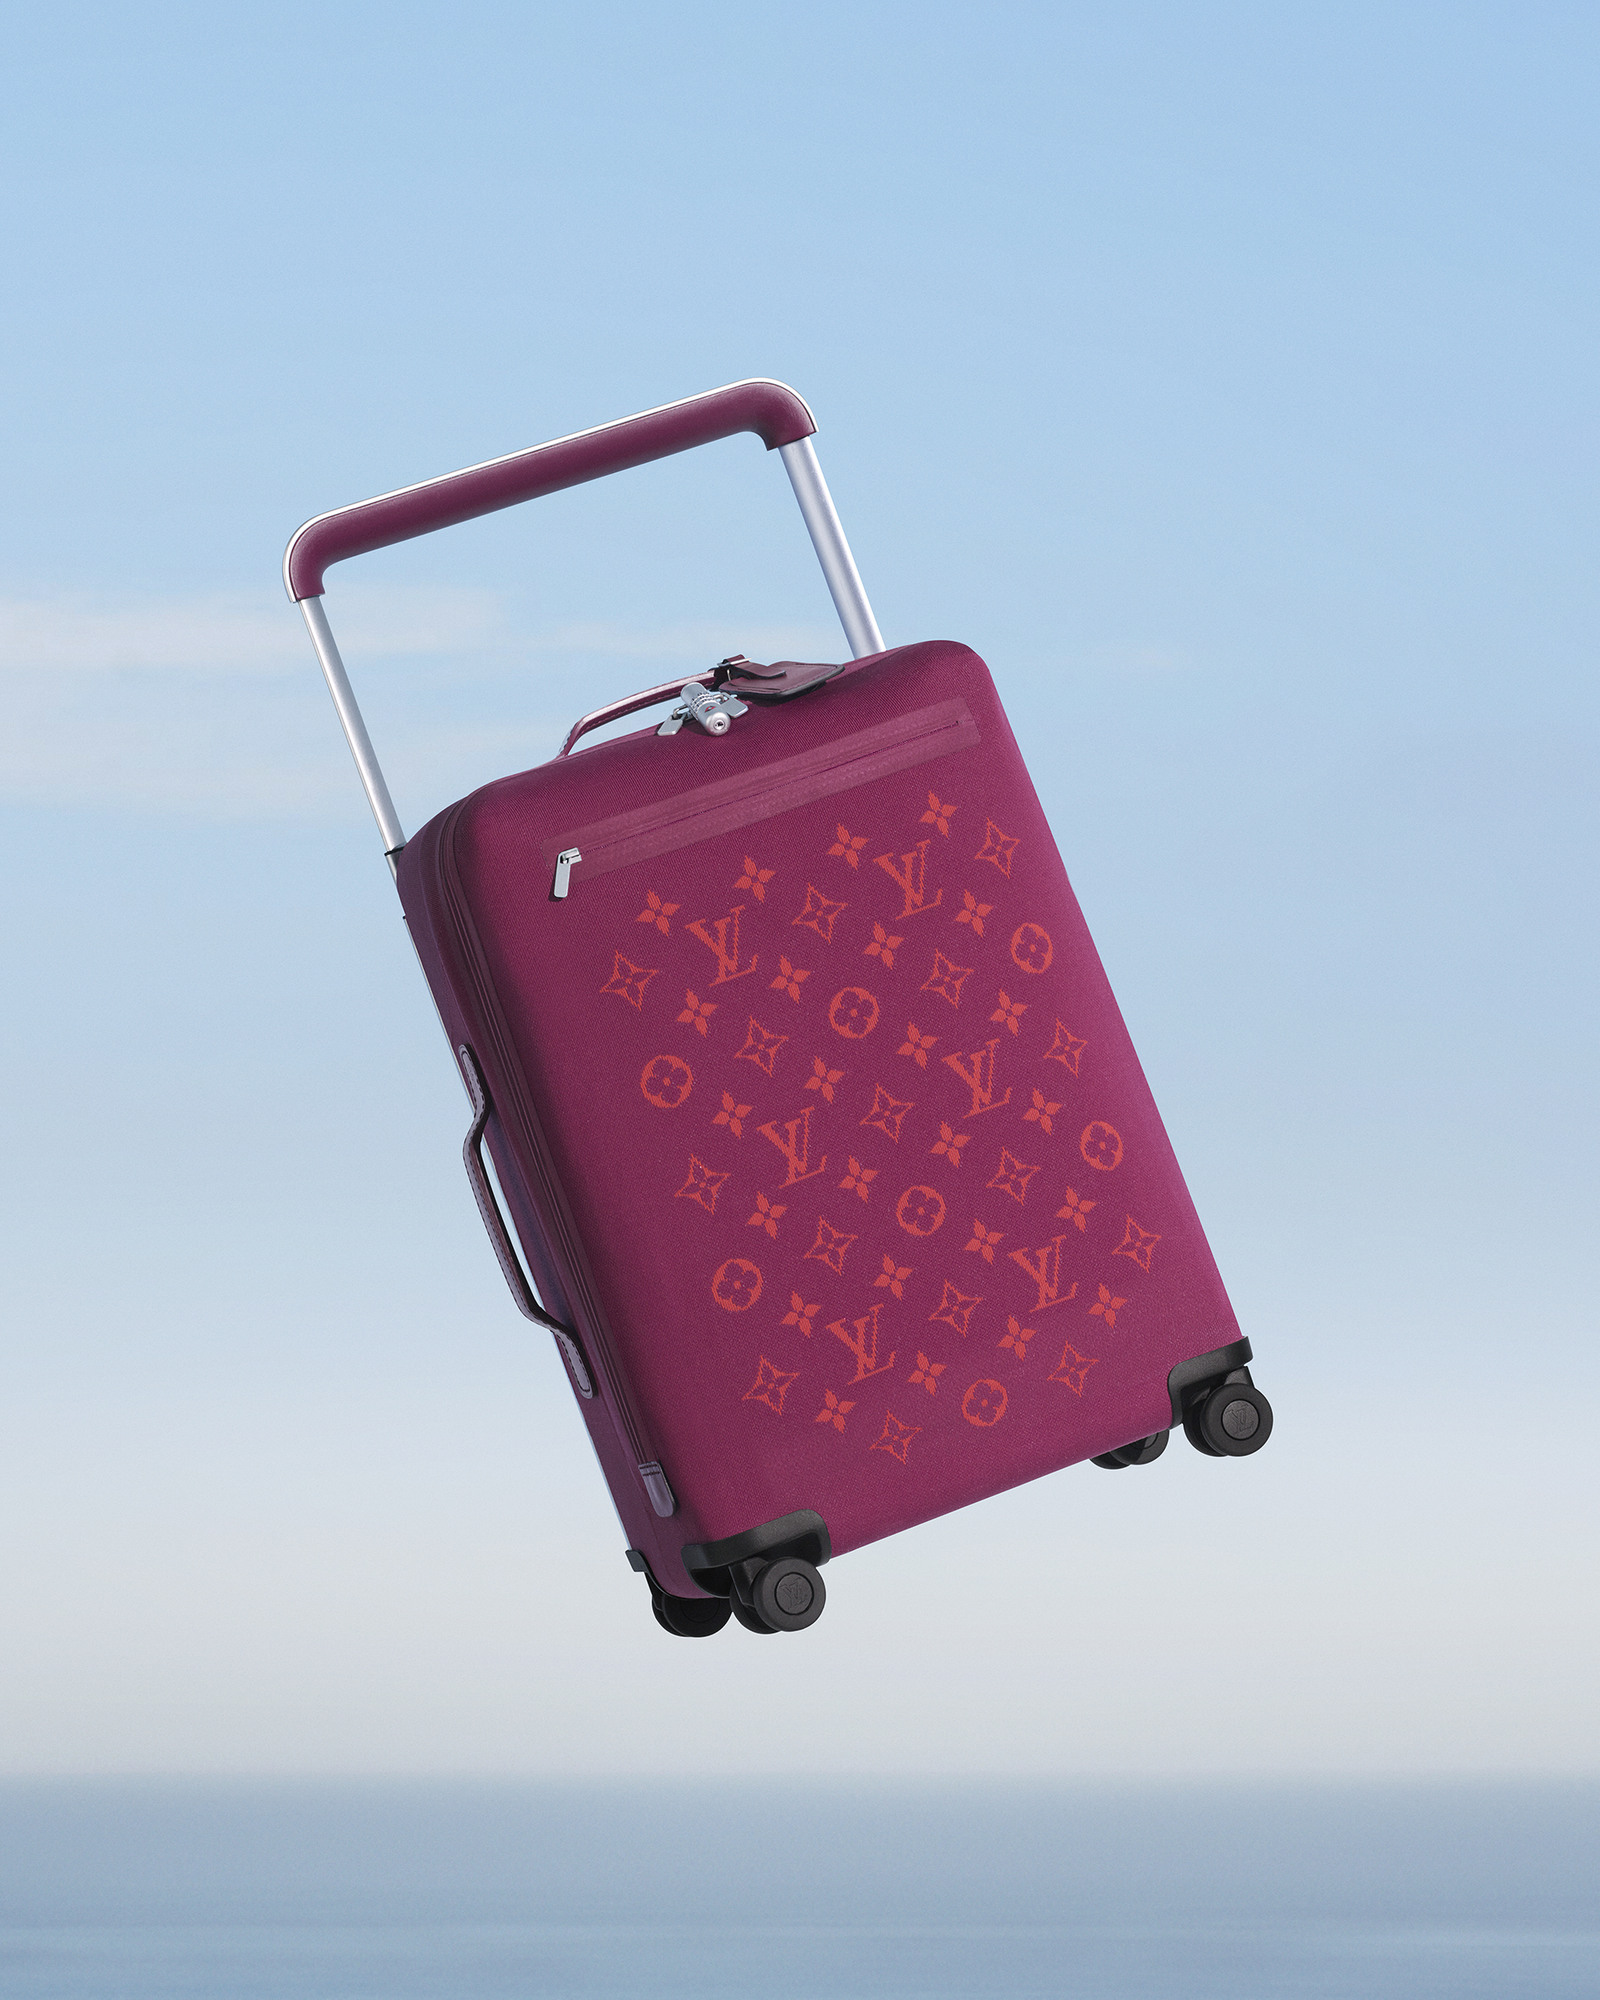 Louis Vuitton Horizon Soft Rolling Luggage Collection By Marc Newson - Pursuitist